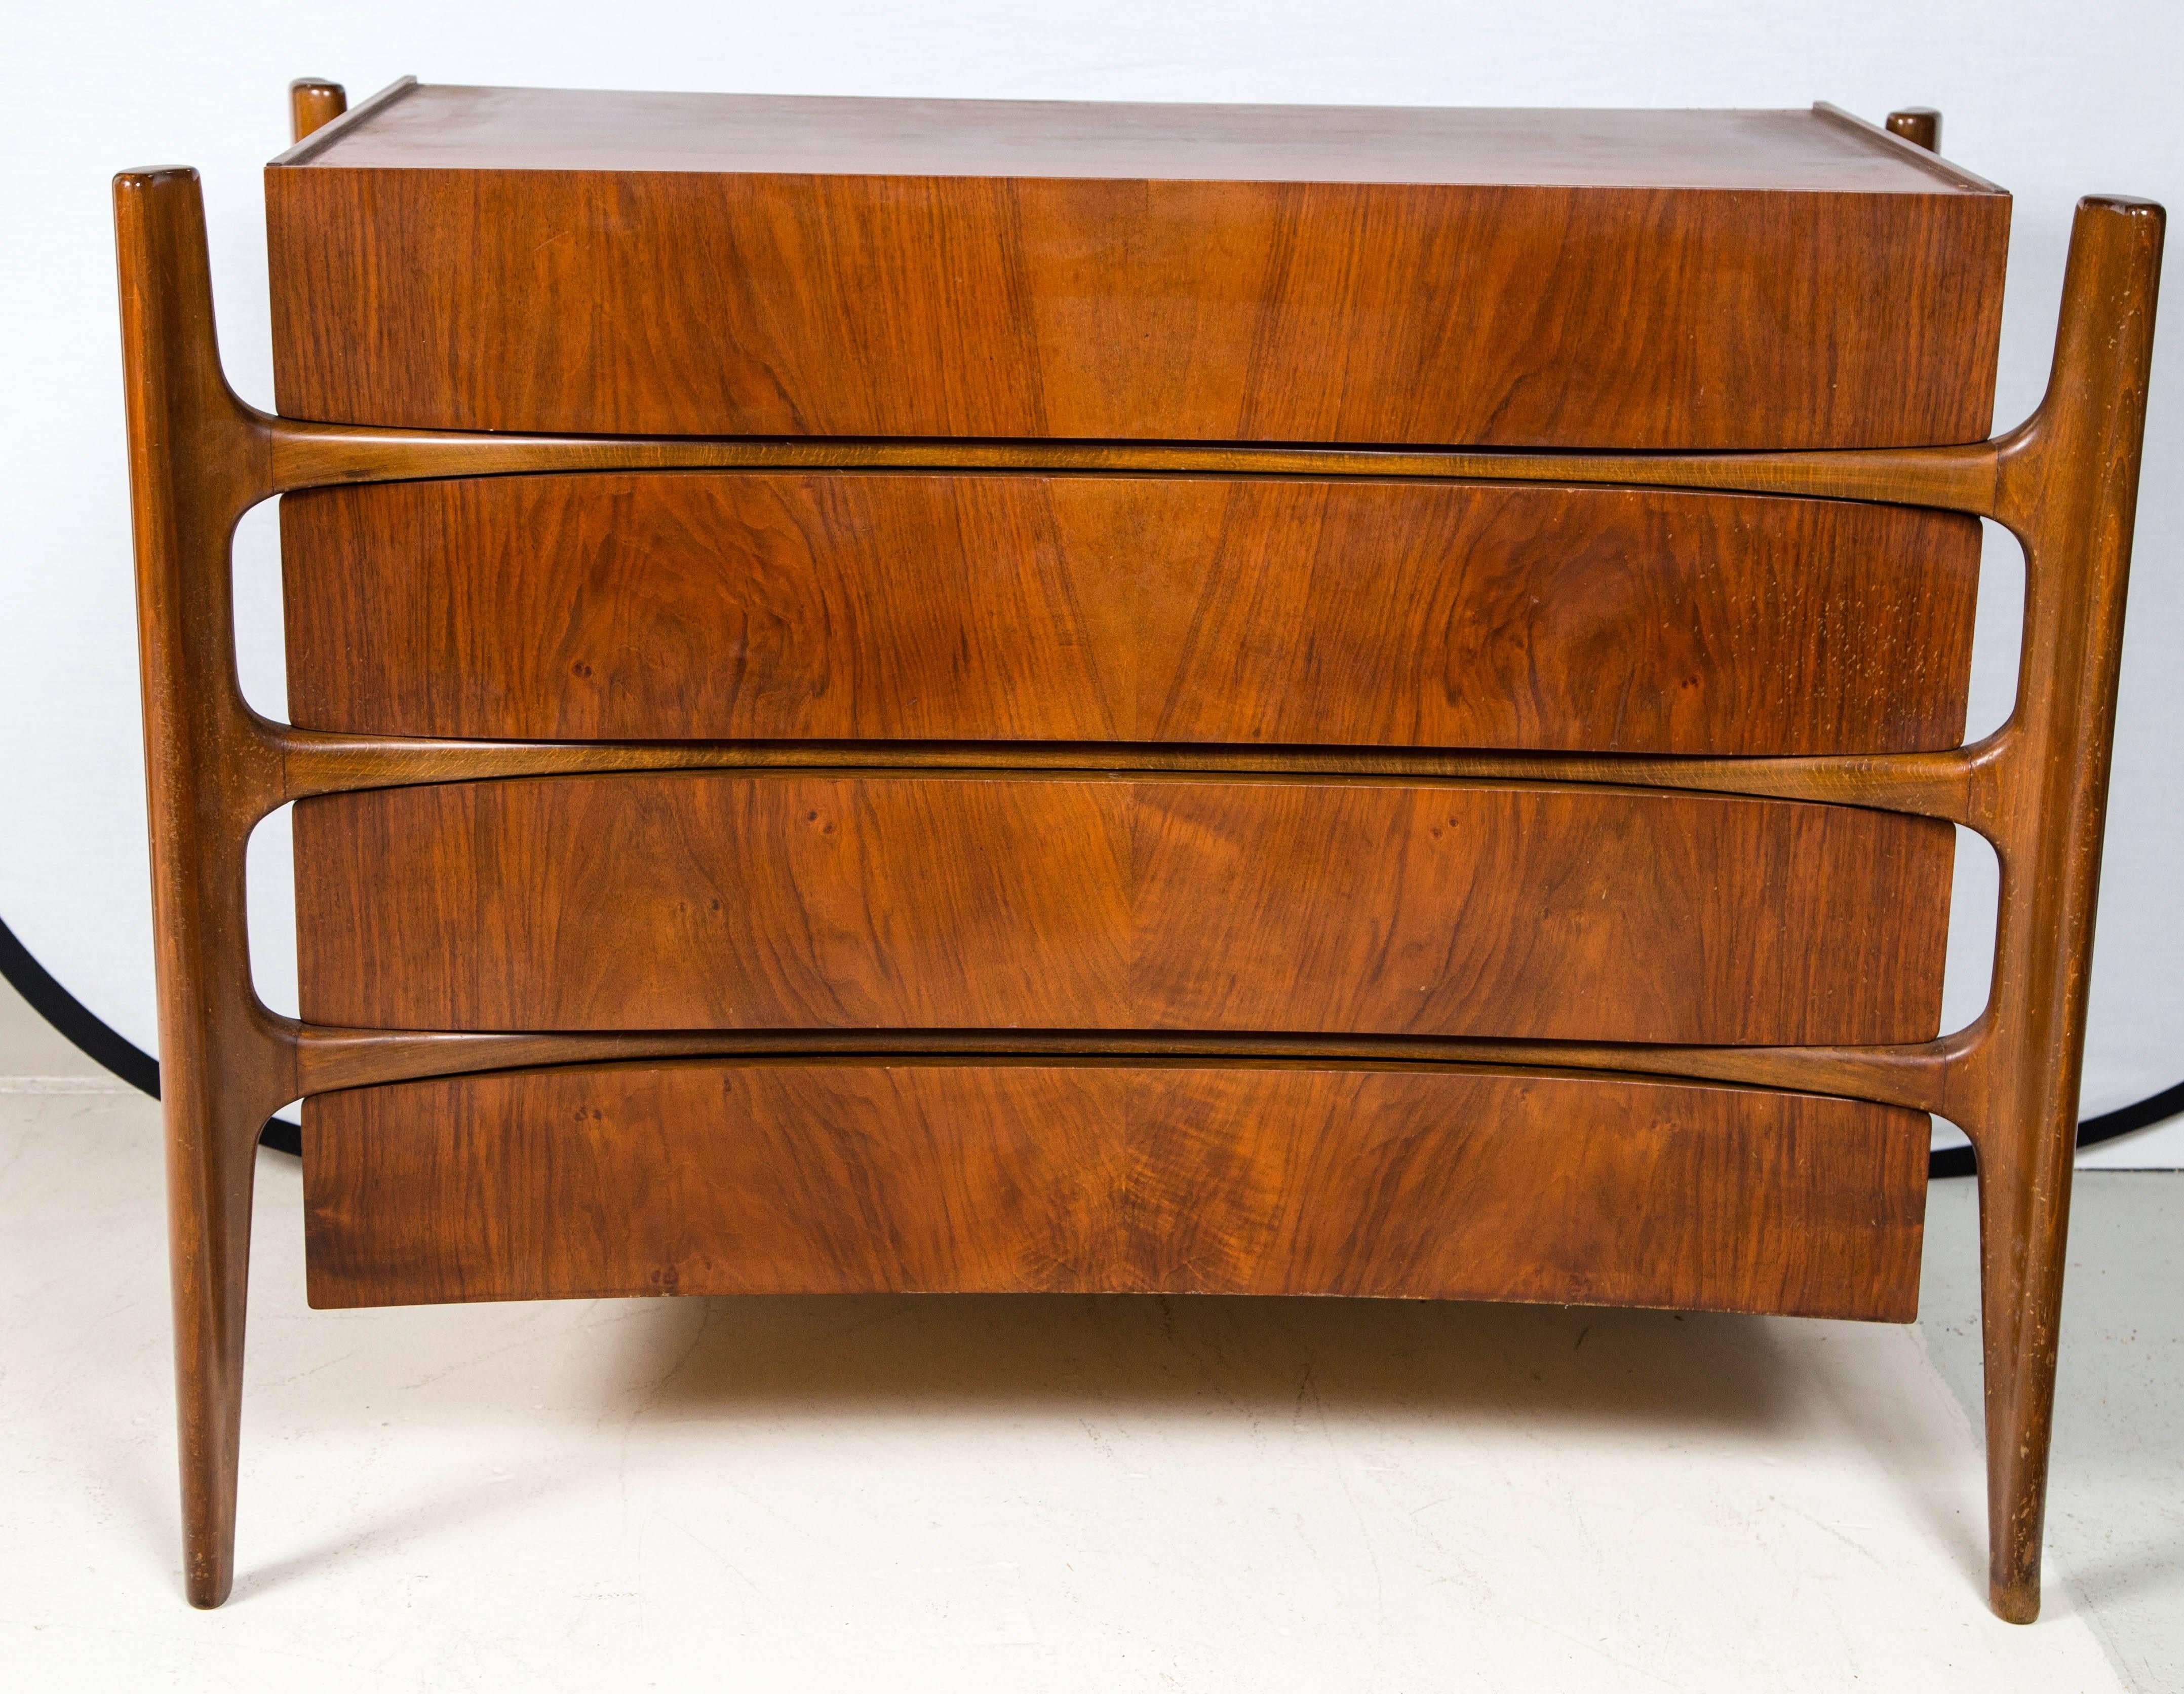 Chest of drawers with four conforming drawers. Concave with outside legs. 
William Hinn for Urban Furniture Company Chest of Drawers
Walnut.